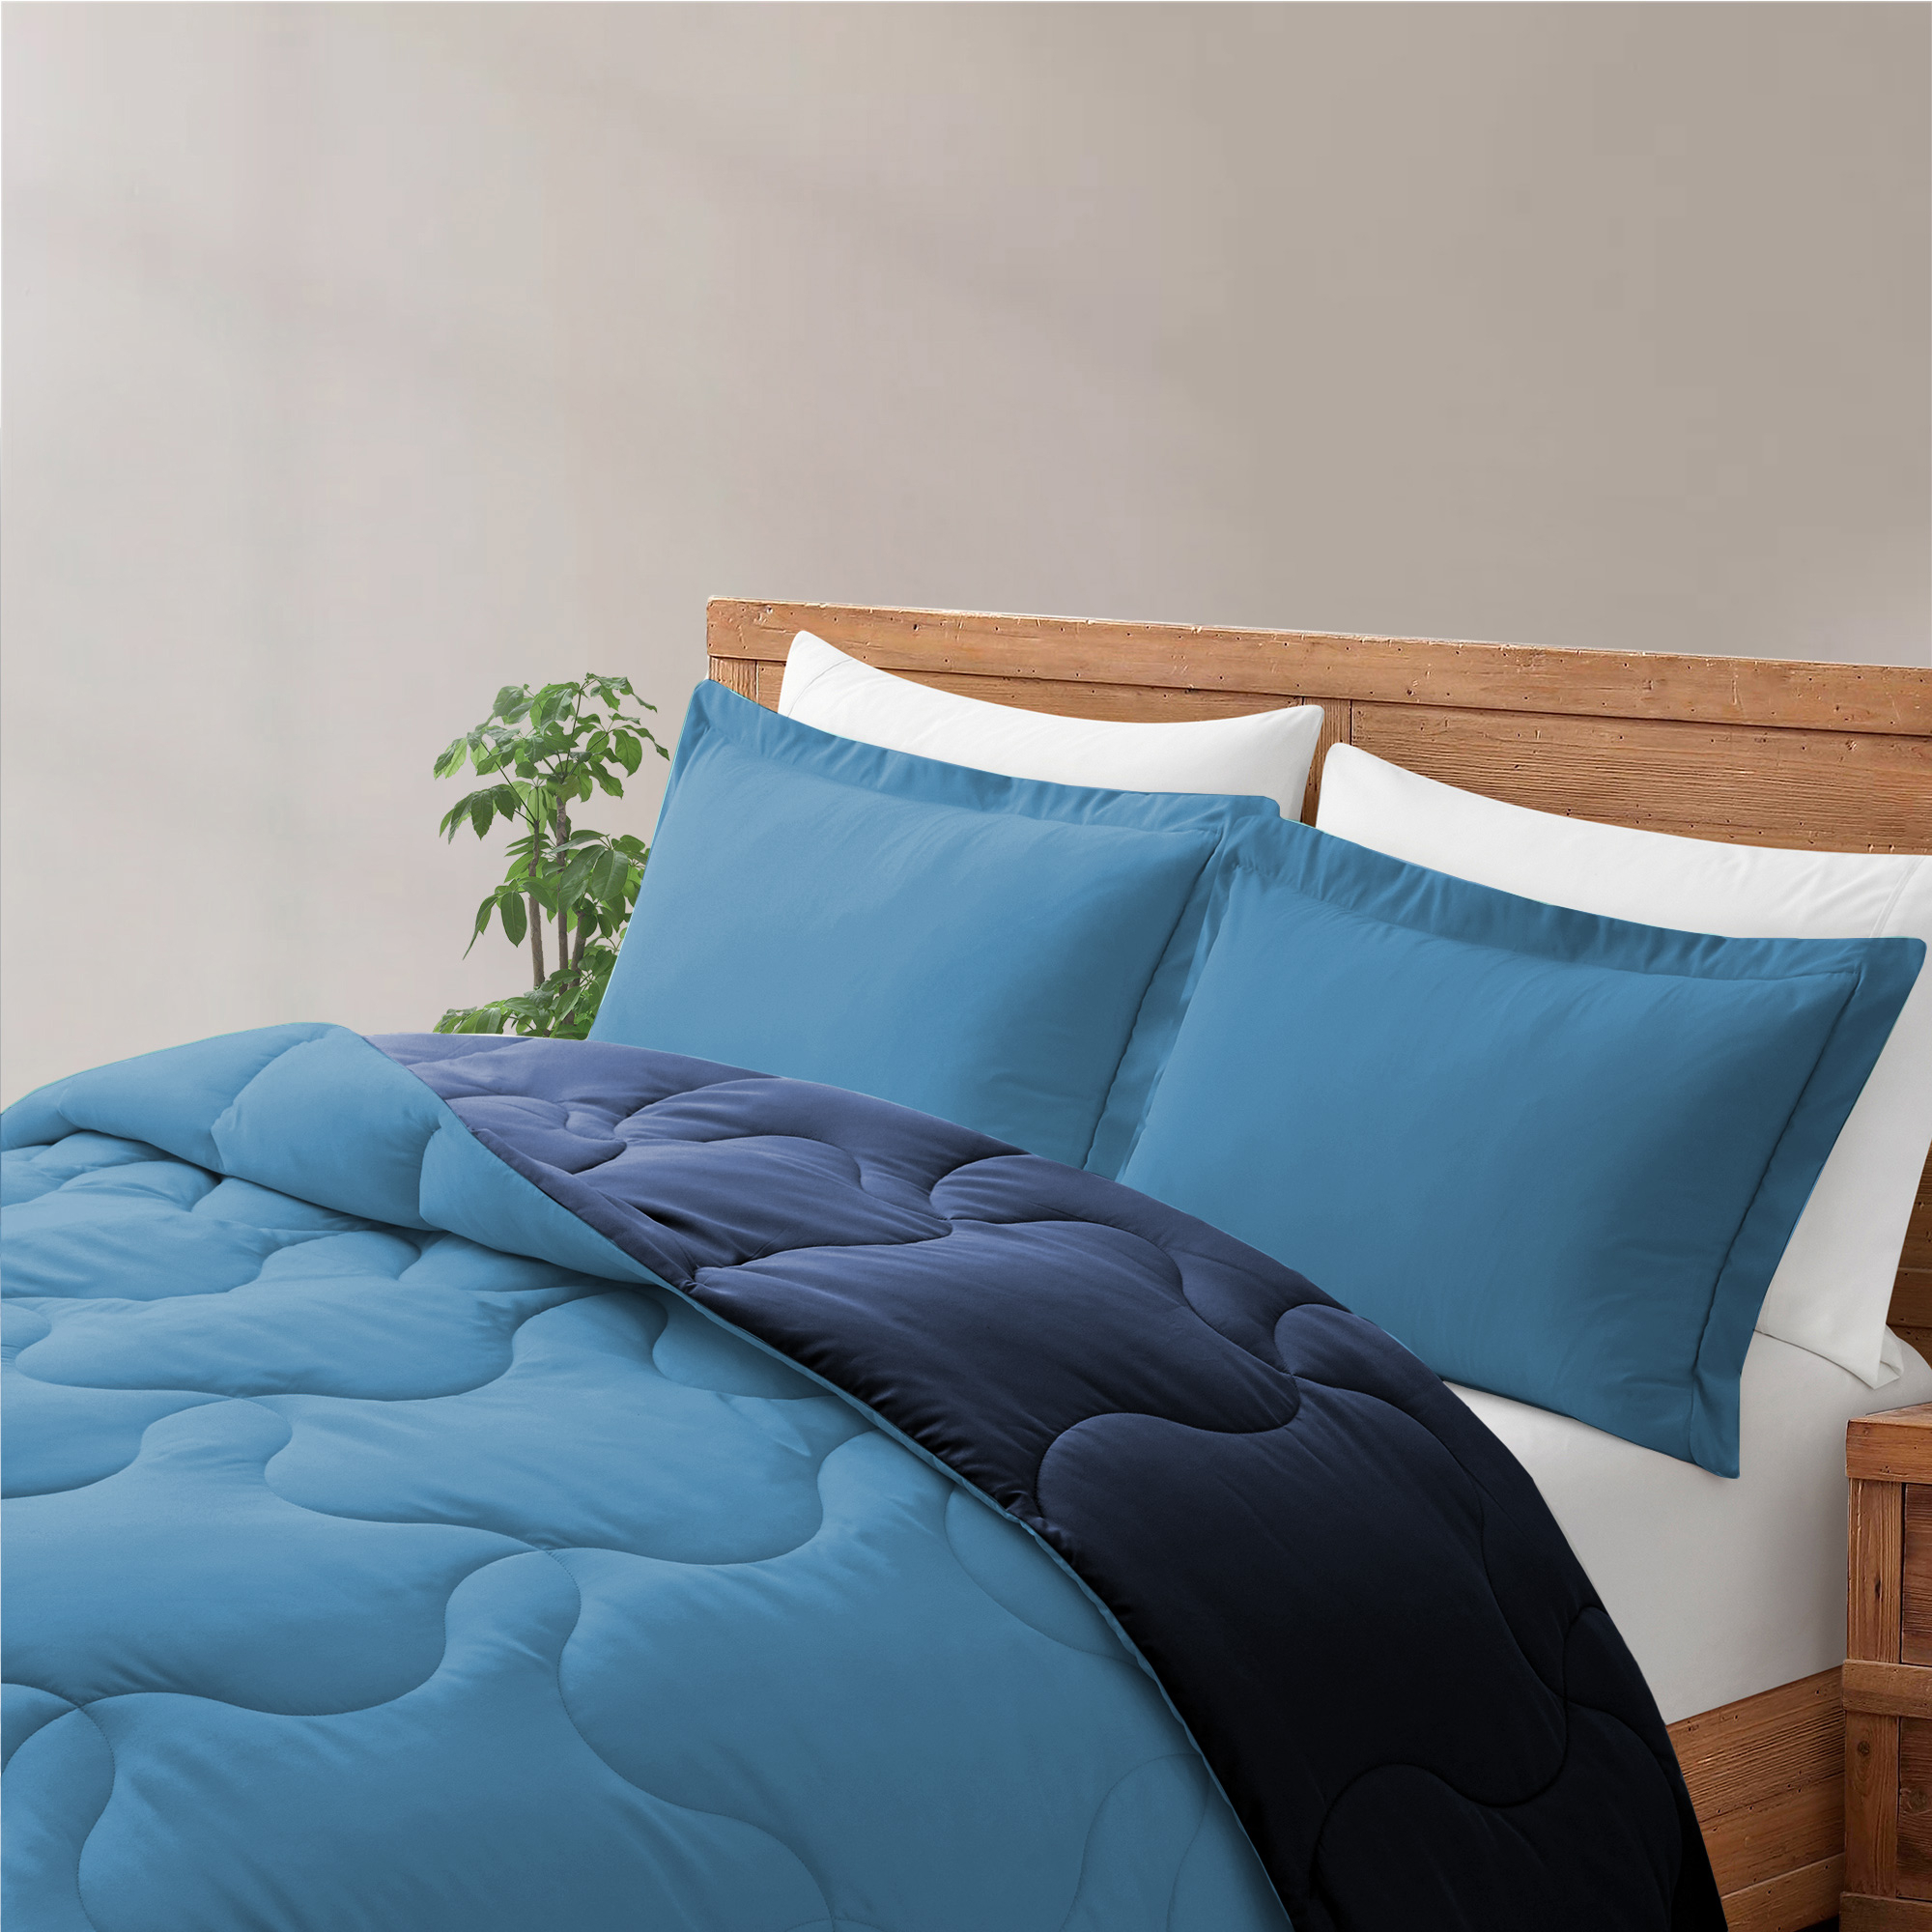 Lightweight Soft Quilted Down Alternative Comforter Reversible Duvet Insert With Corner Tabs - Twin Size